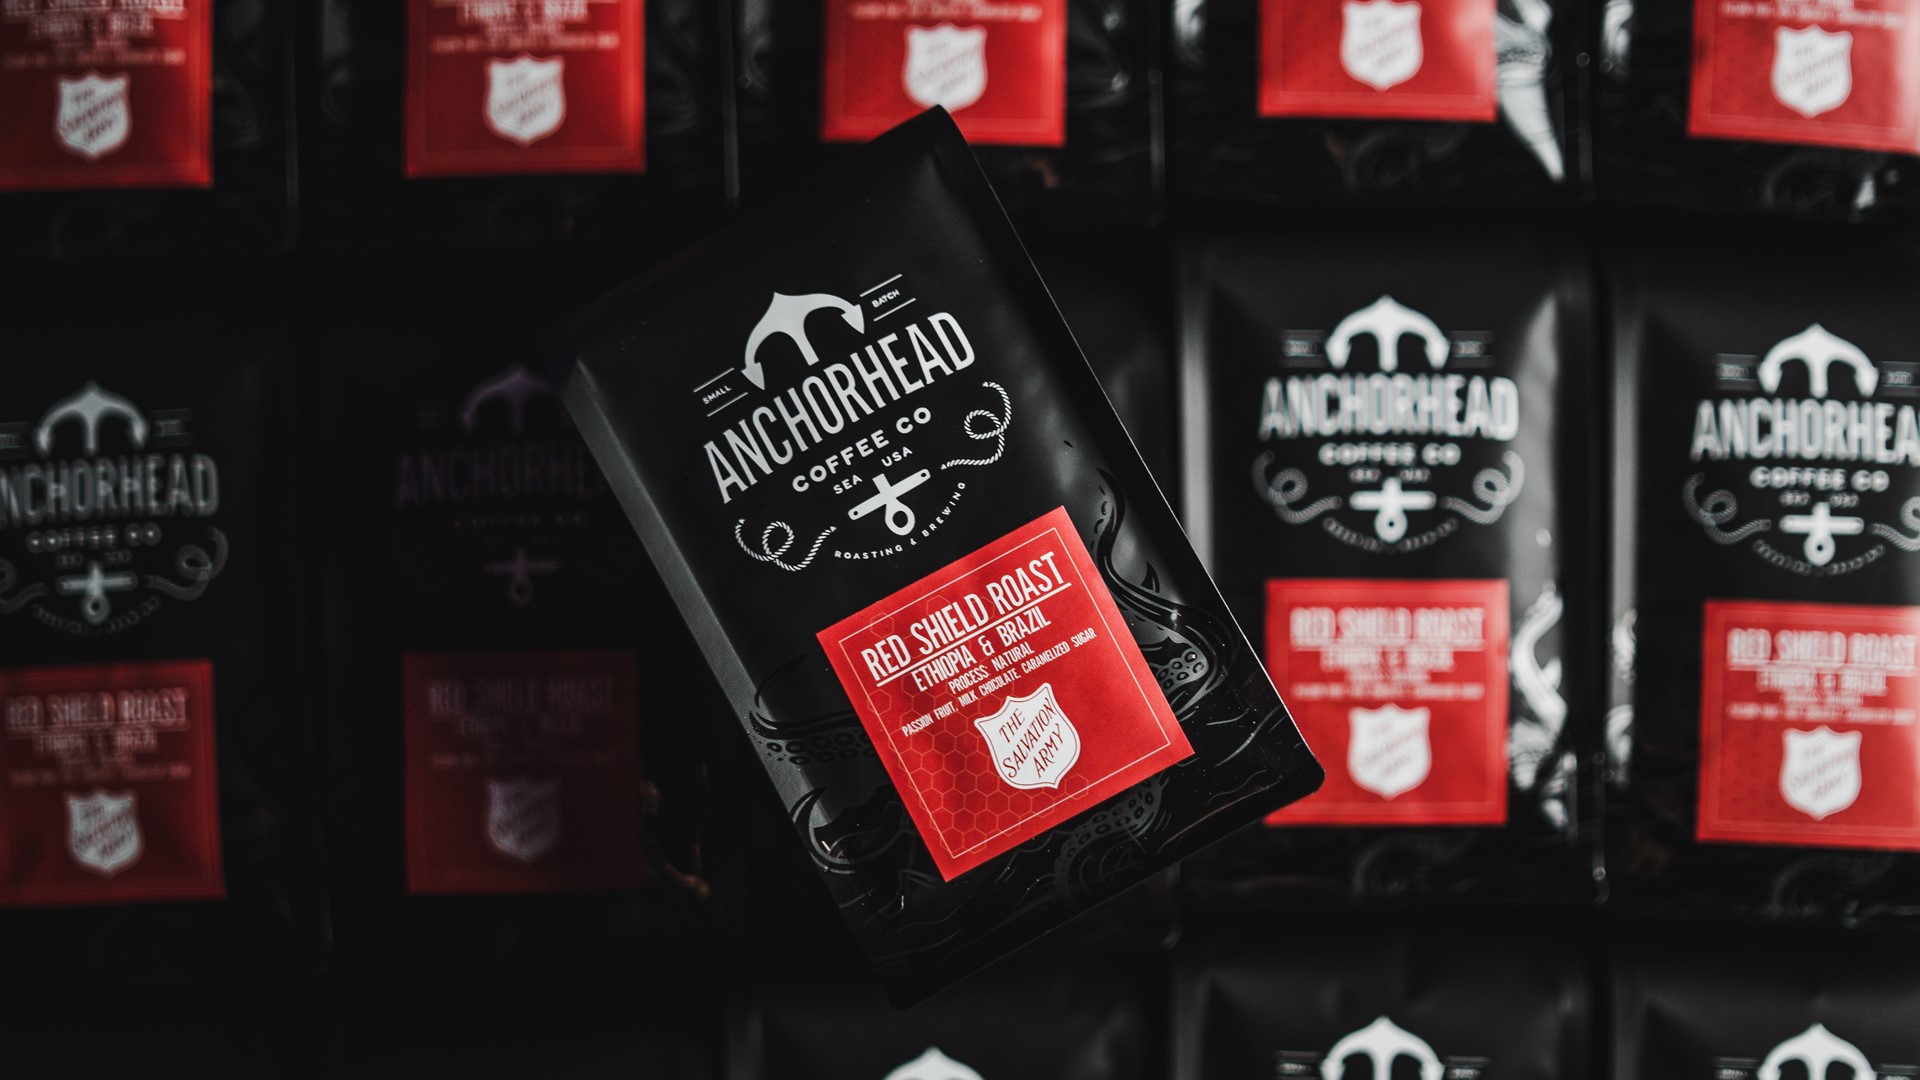 For each bag of Anchorhead's Red Shield roast sold, $1 will be donated to The Salvation Army. Sponsored by The Salvation Army.